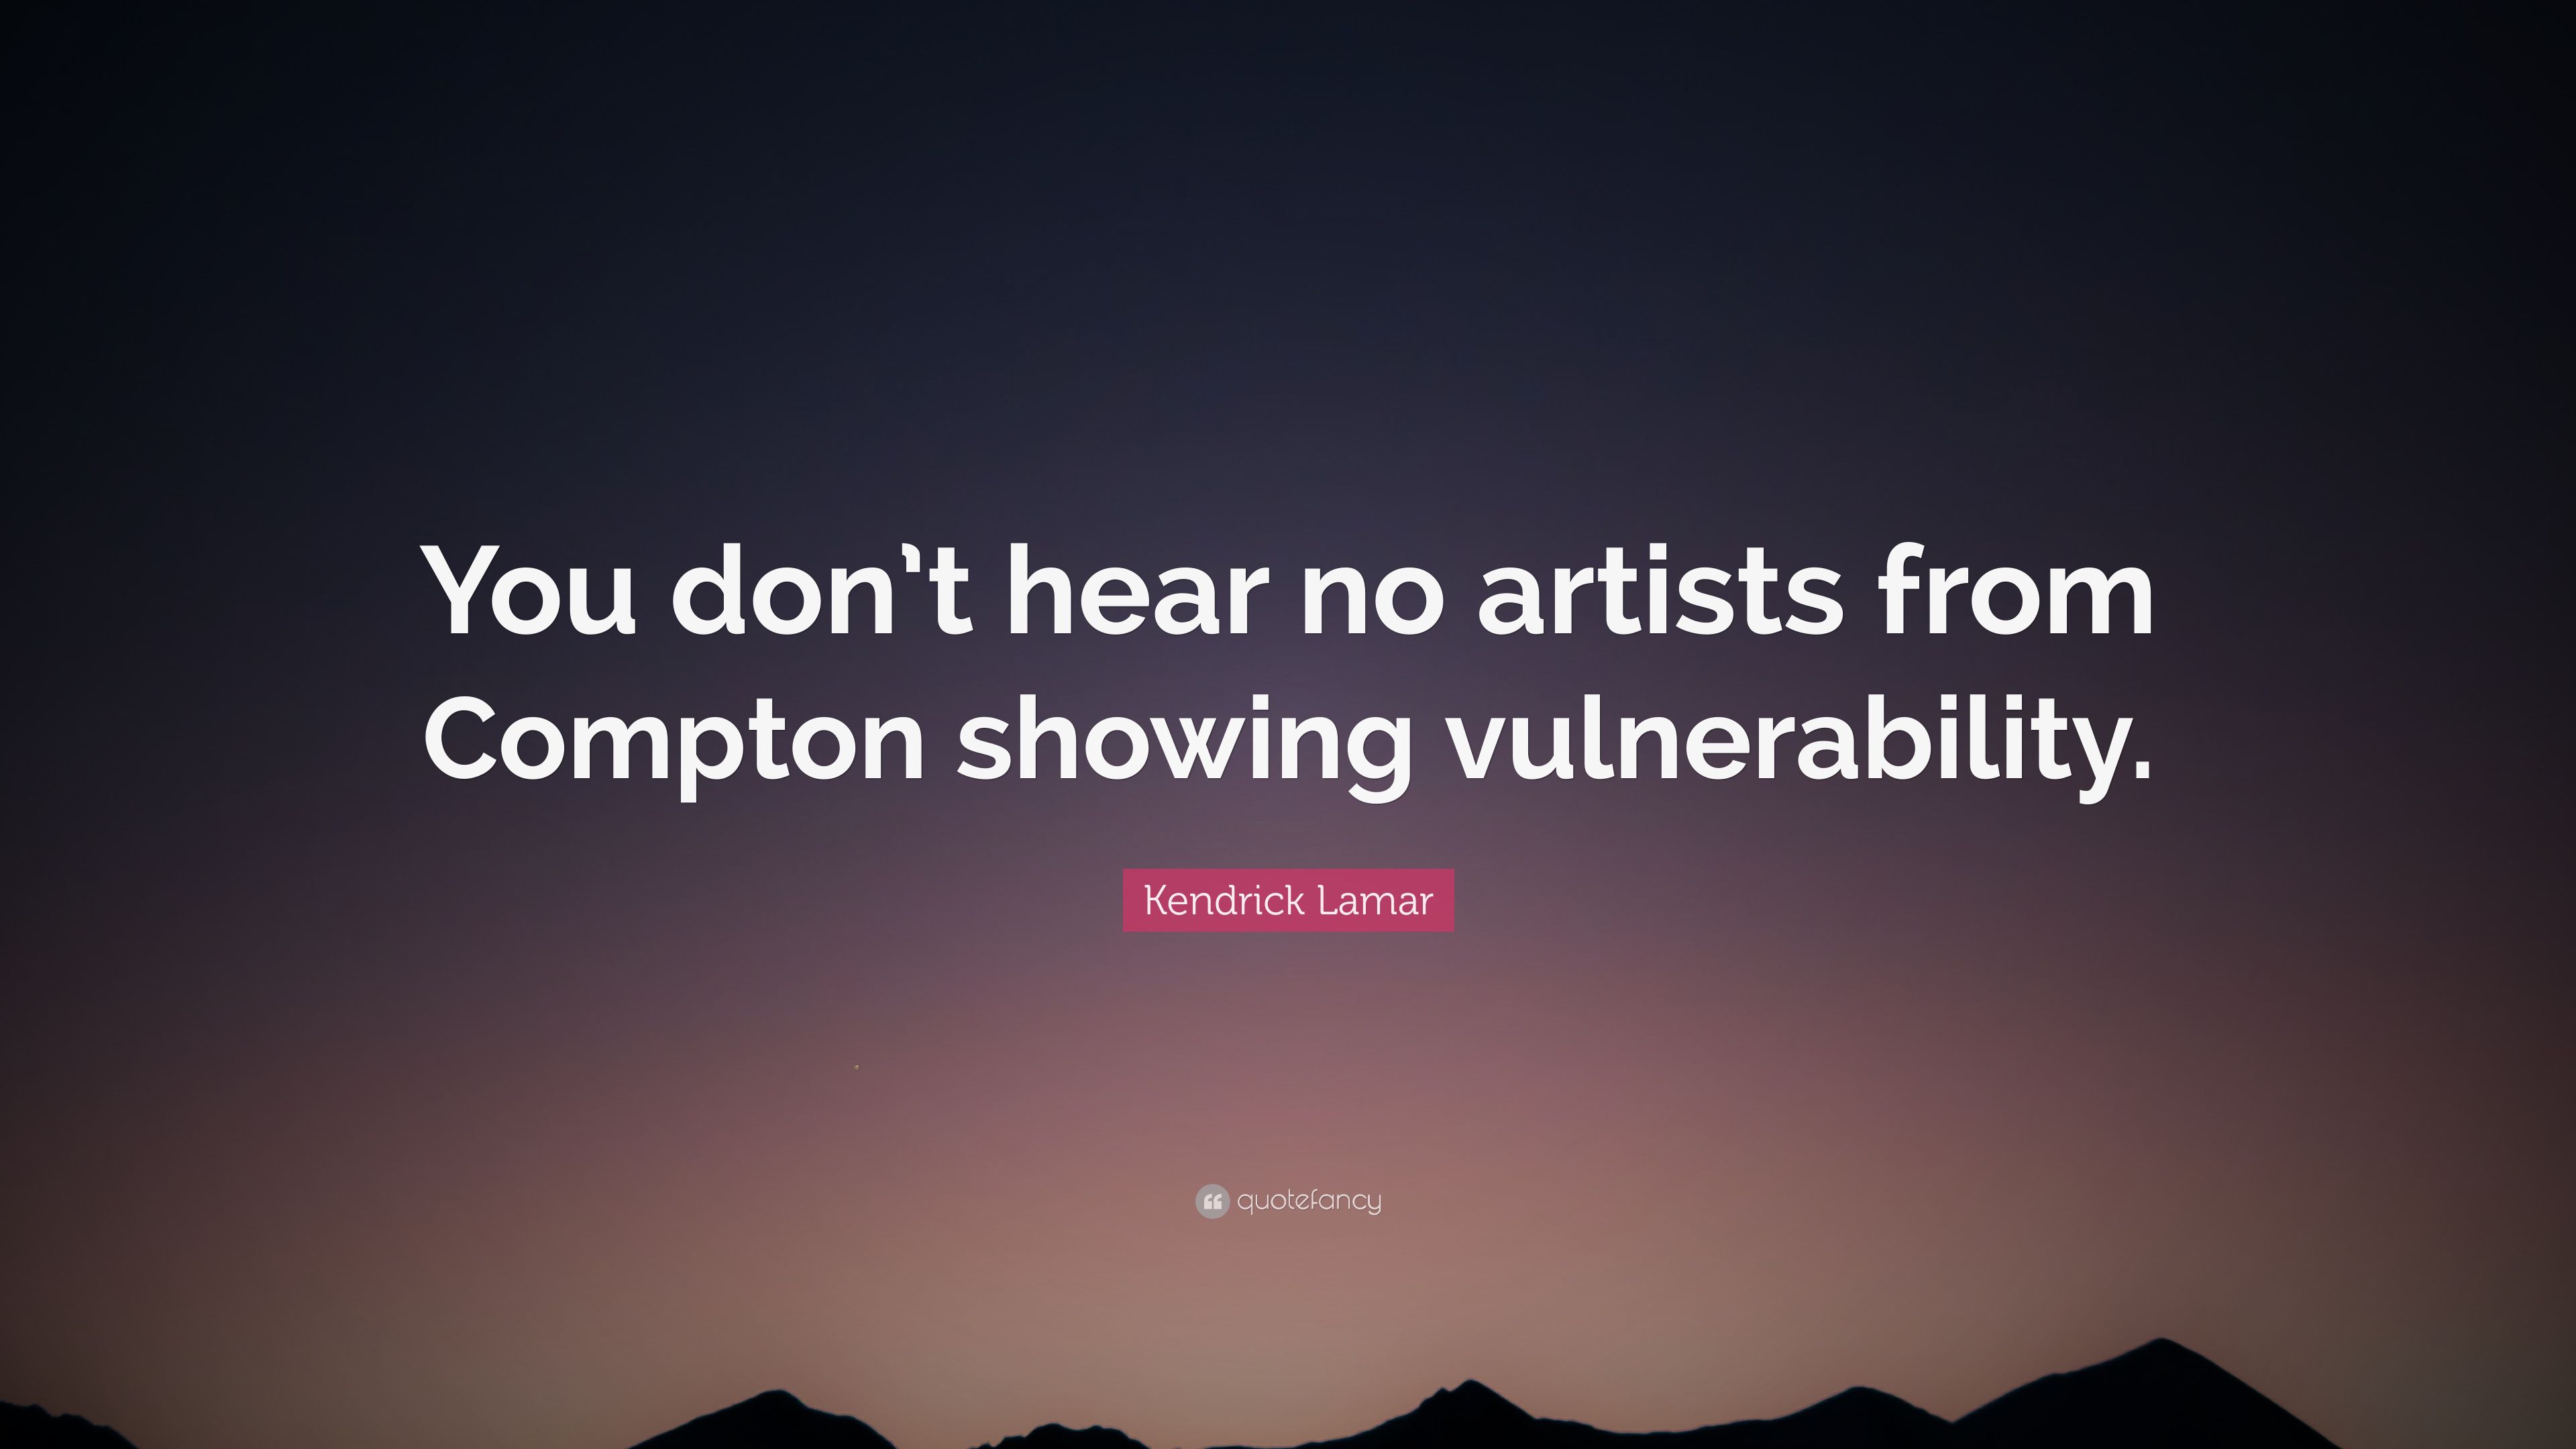 Kendrick Lamar Quote: “You don't hear no artists from Compton showing vulnerability.” (7 wallpaper)